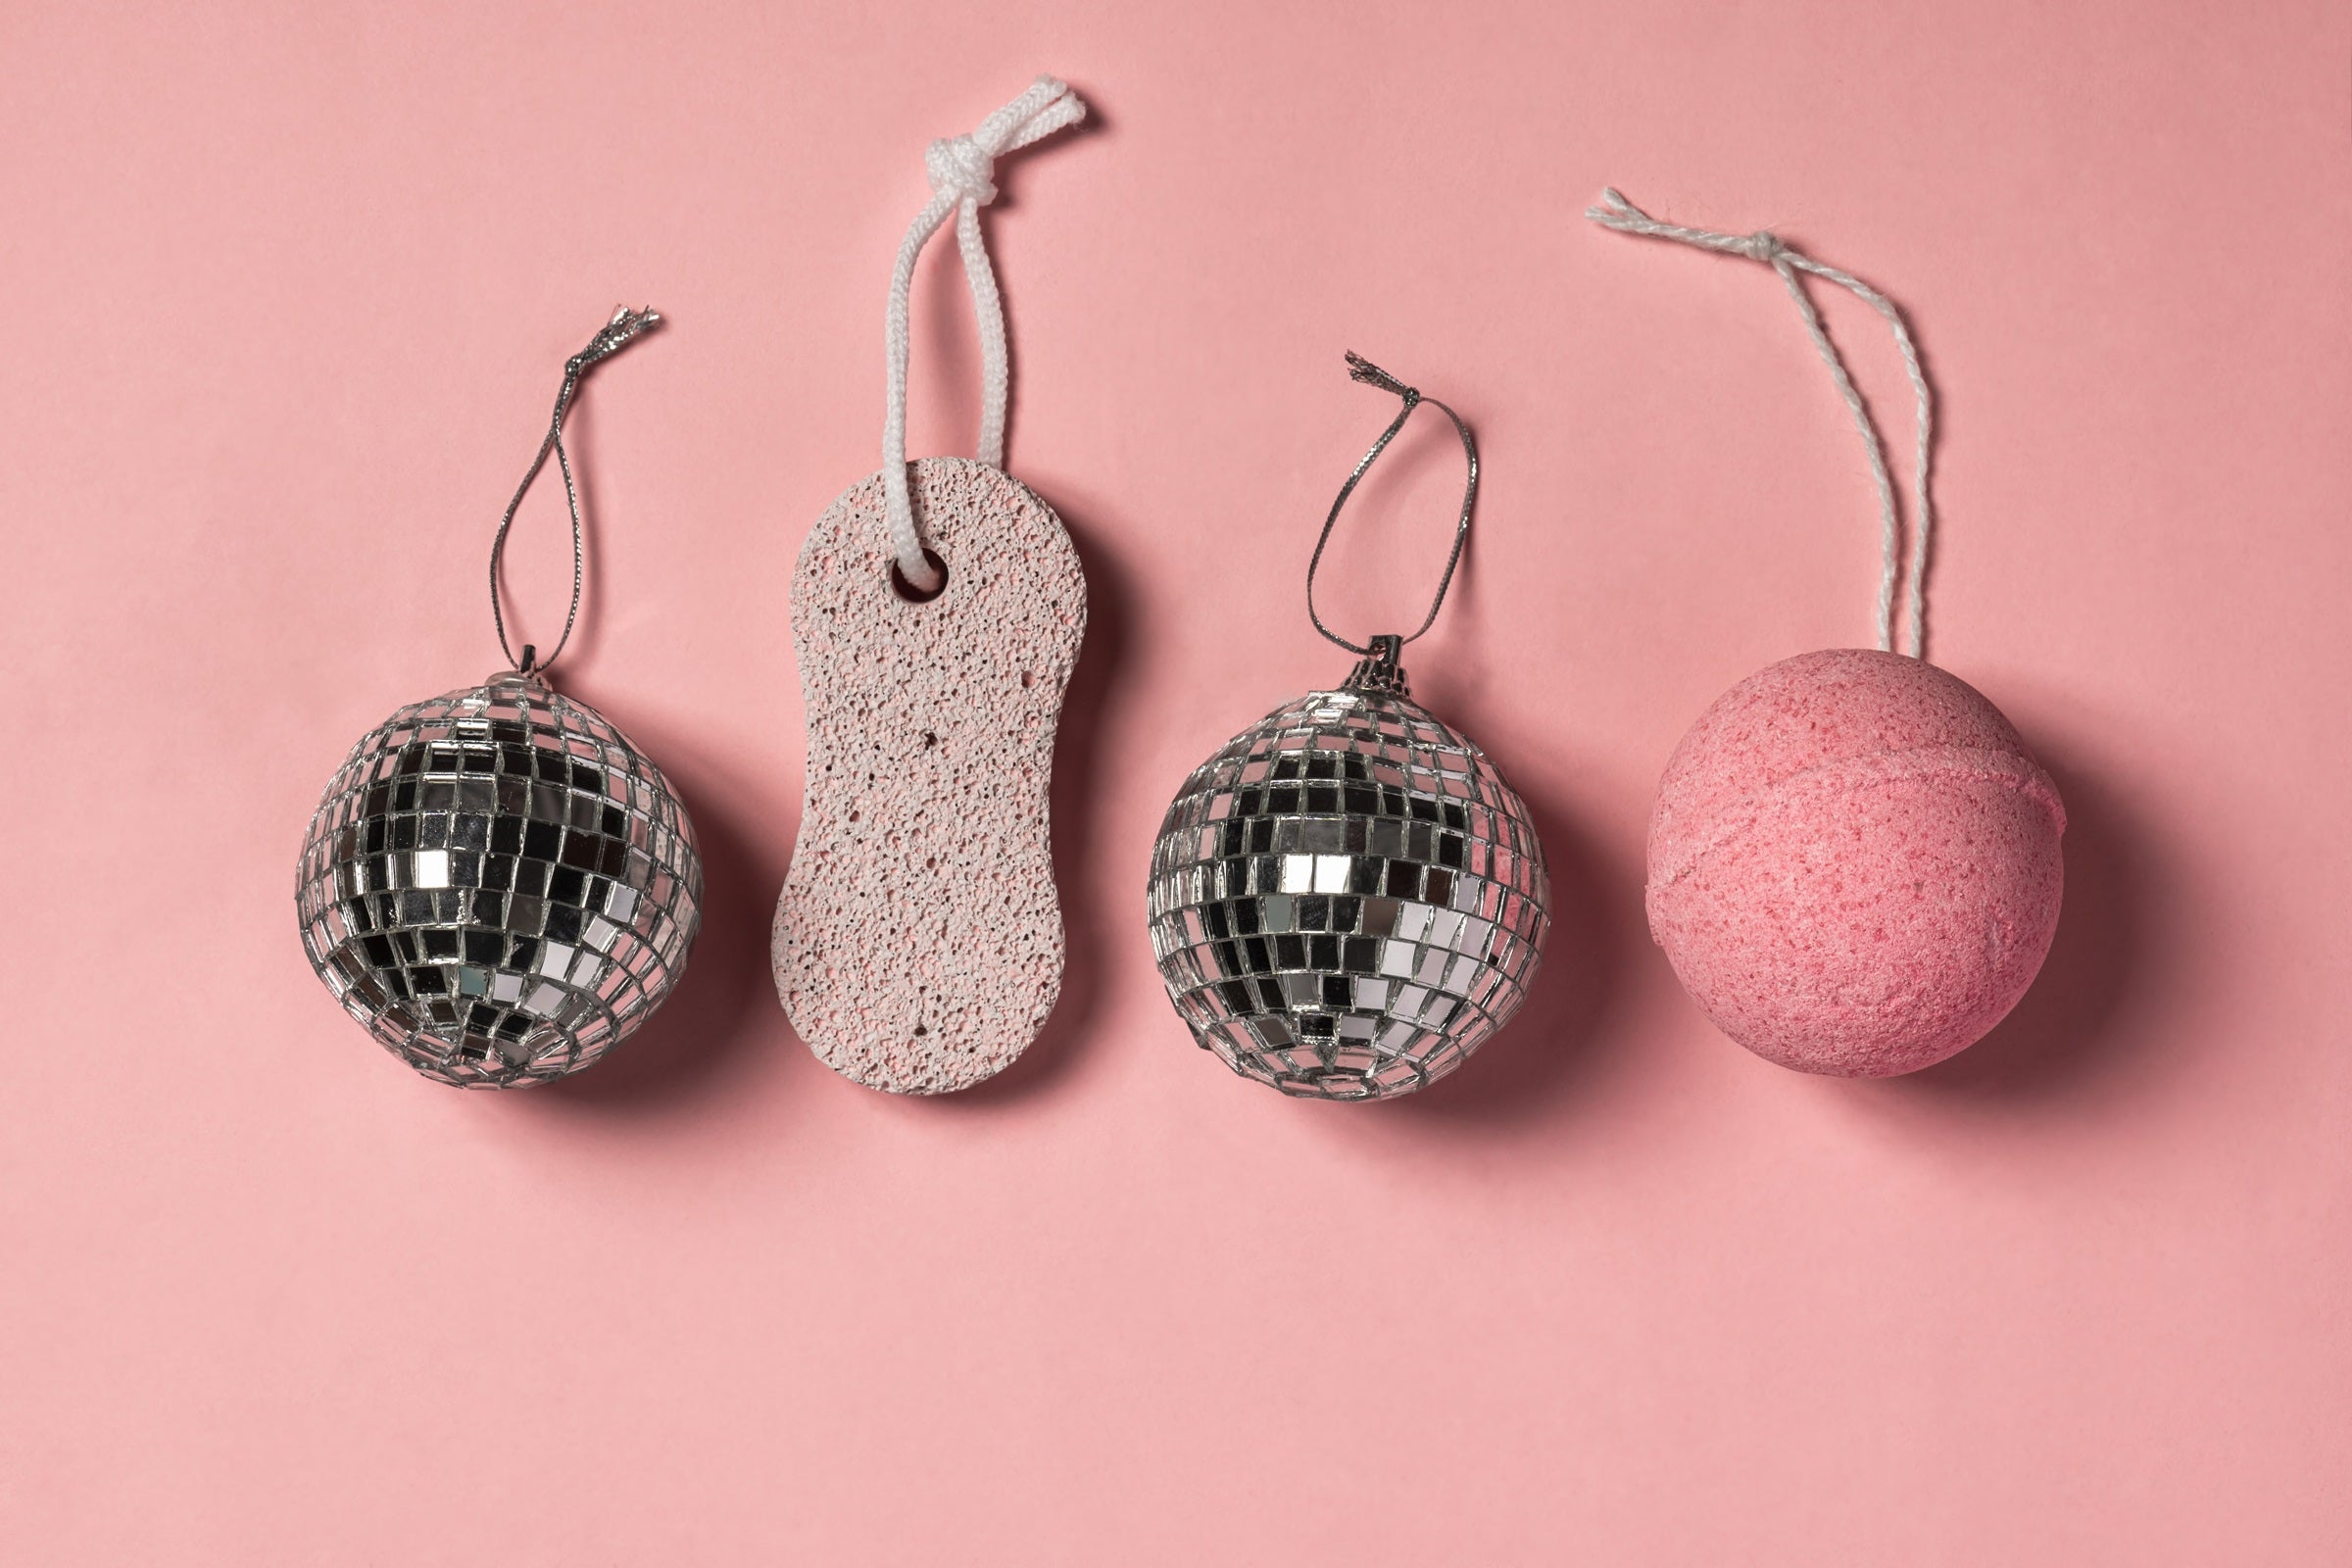 Tree ornaments with a bath bomb